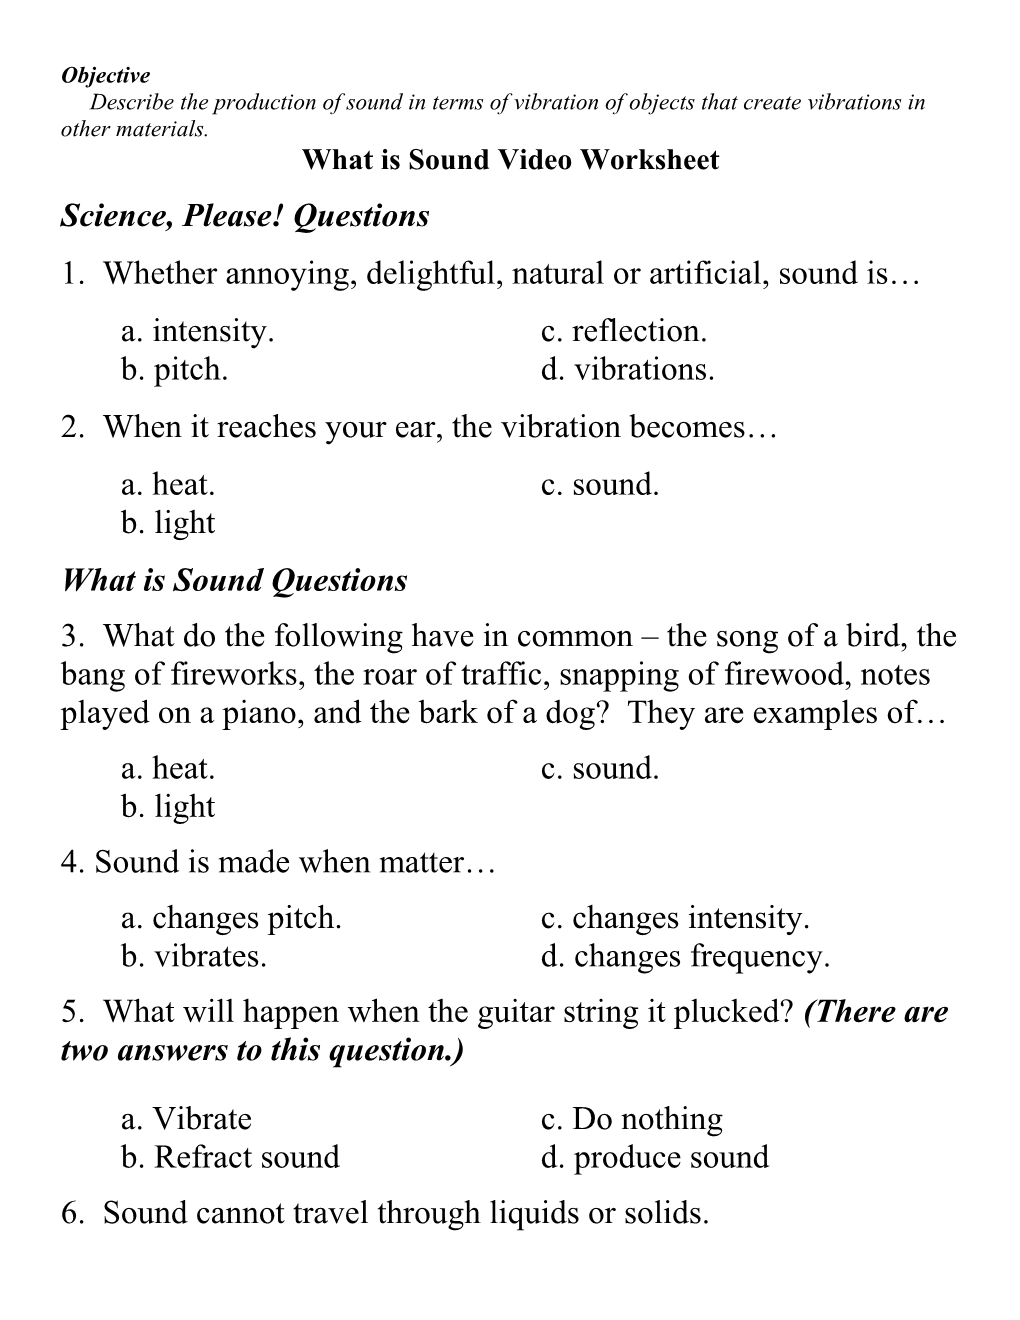 What Is Sound Video Worksheet